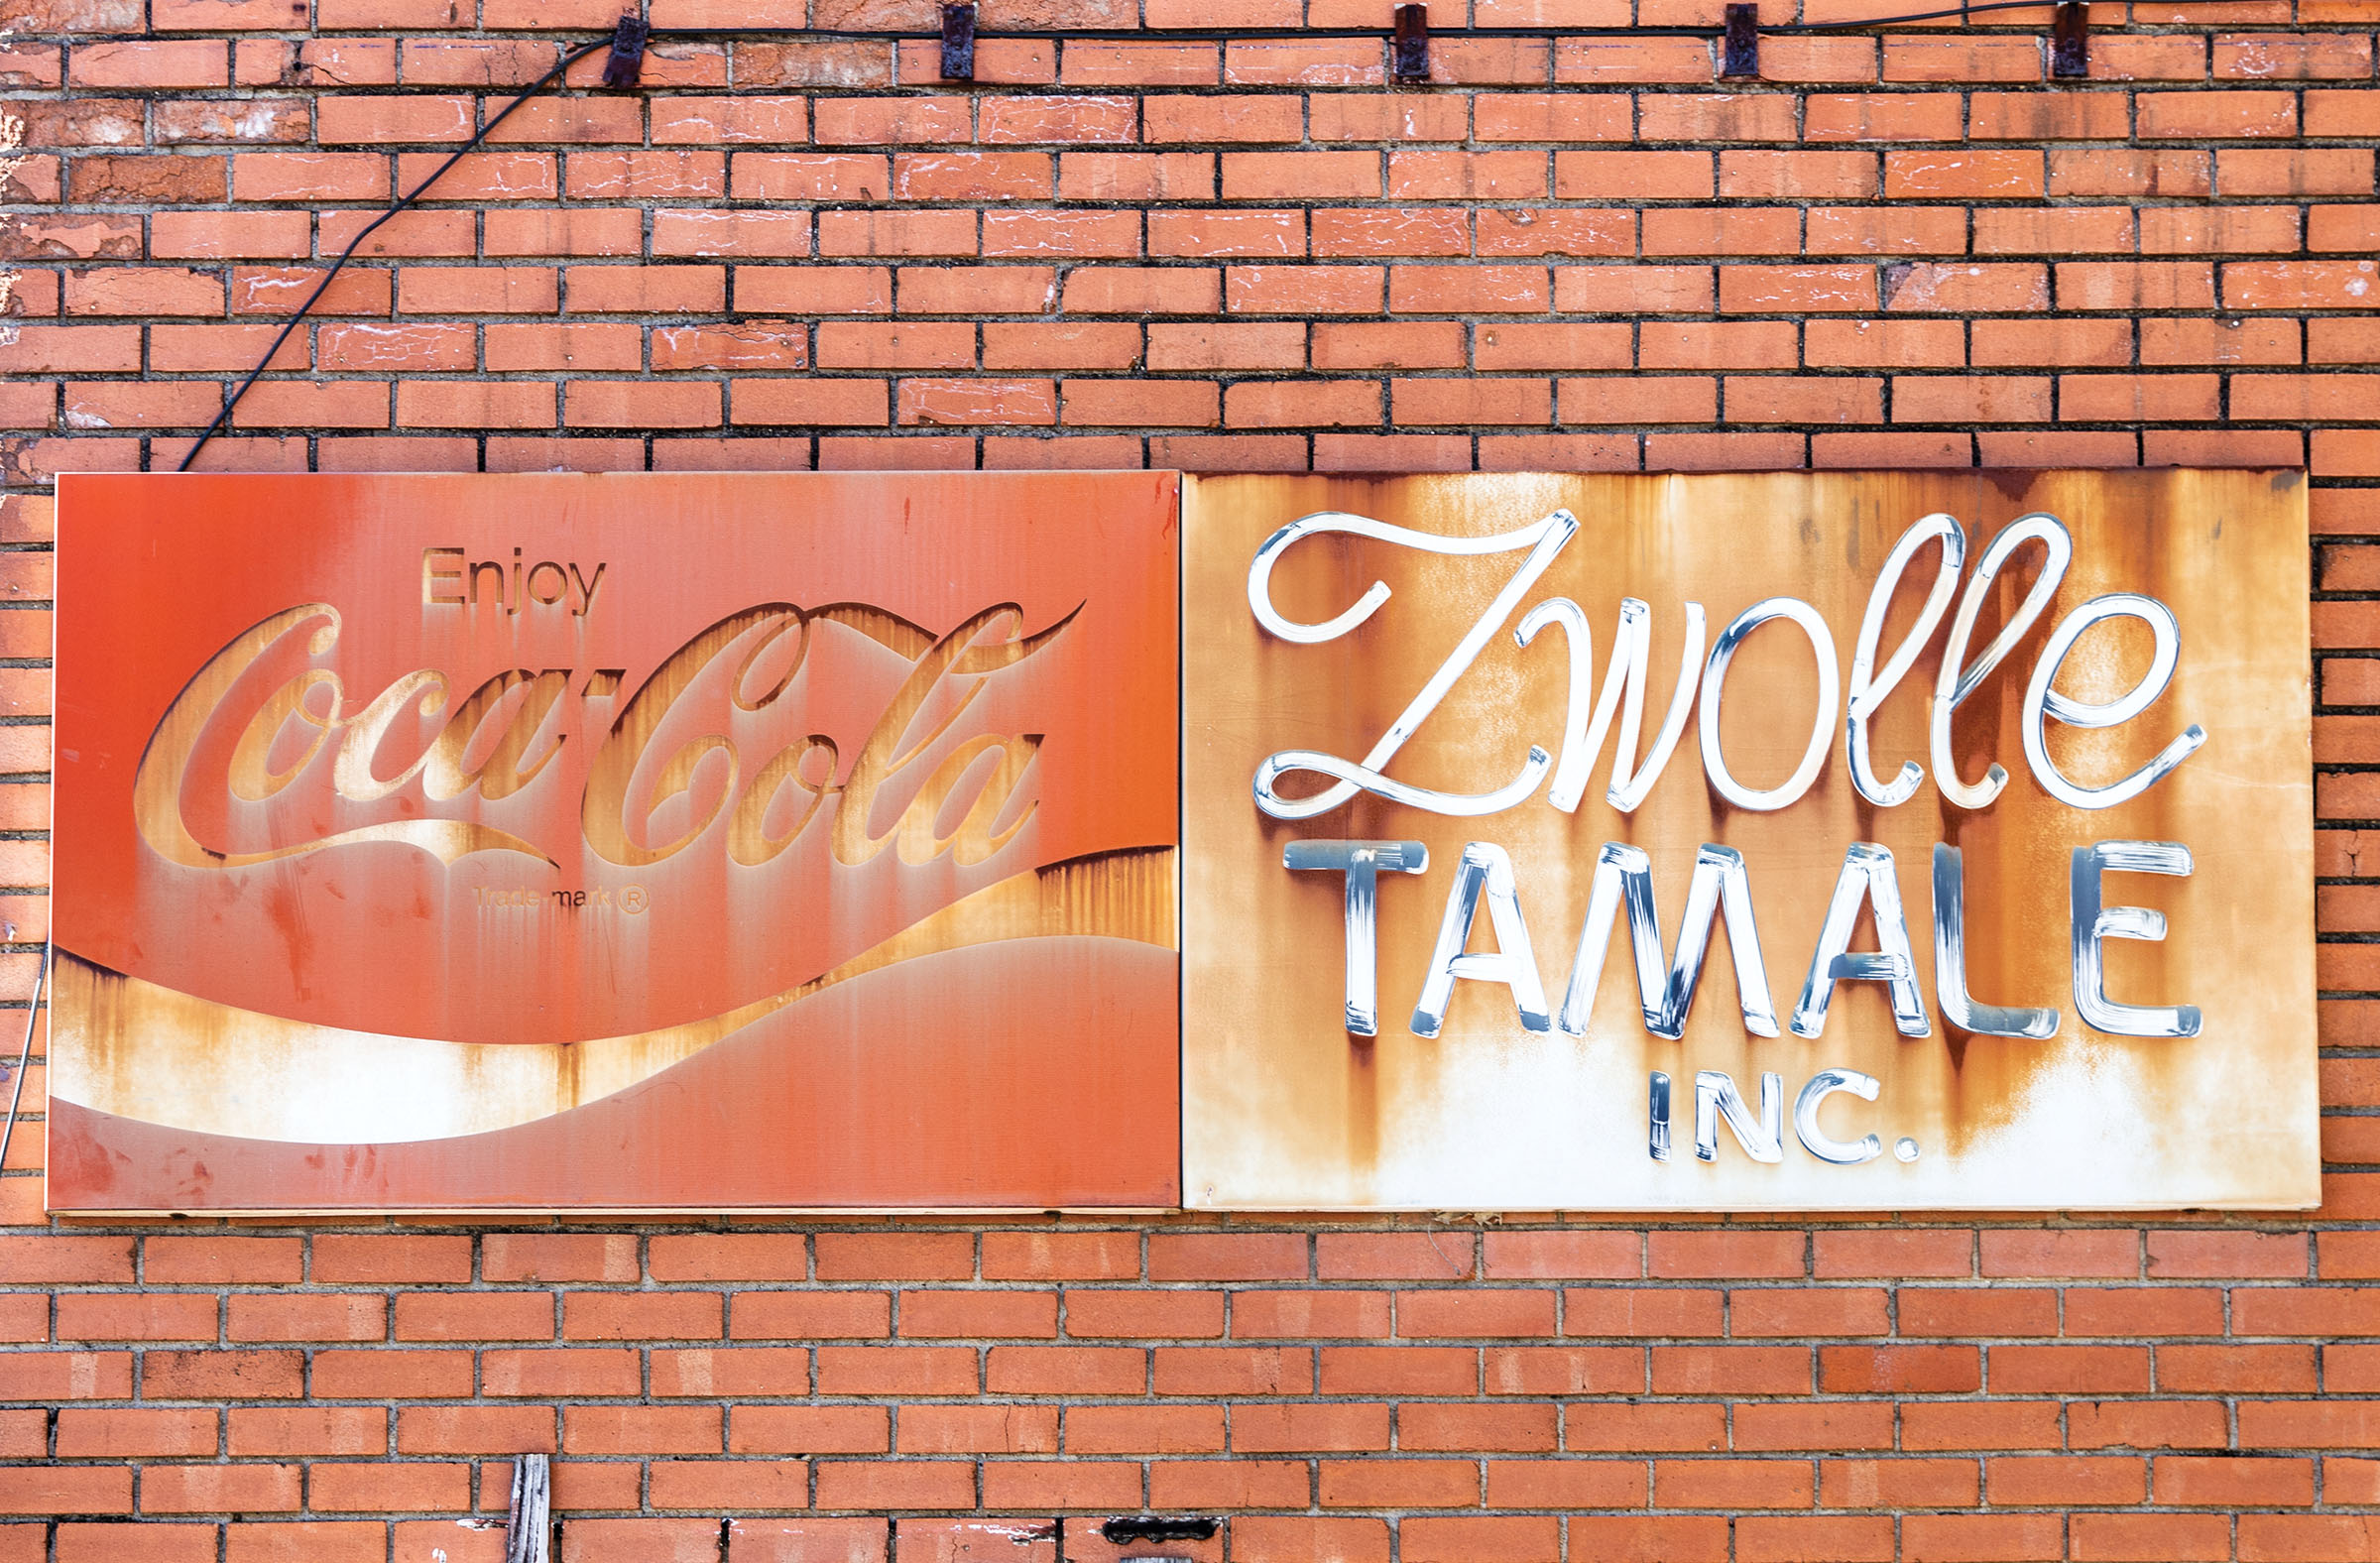 A rusted sign on a brick wall reading "Coca Cola" and "Zwolle